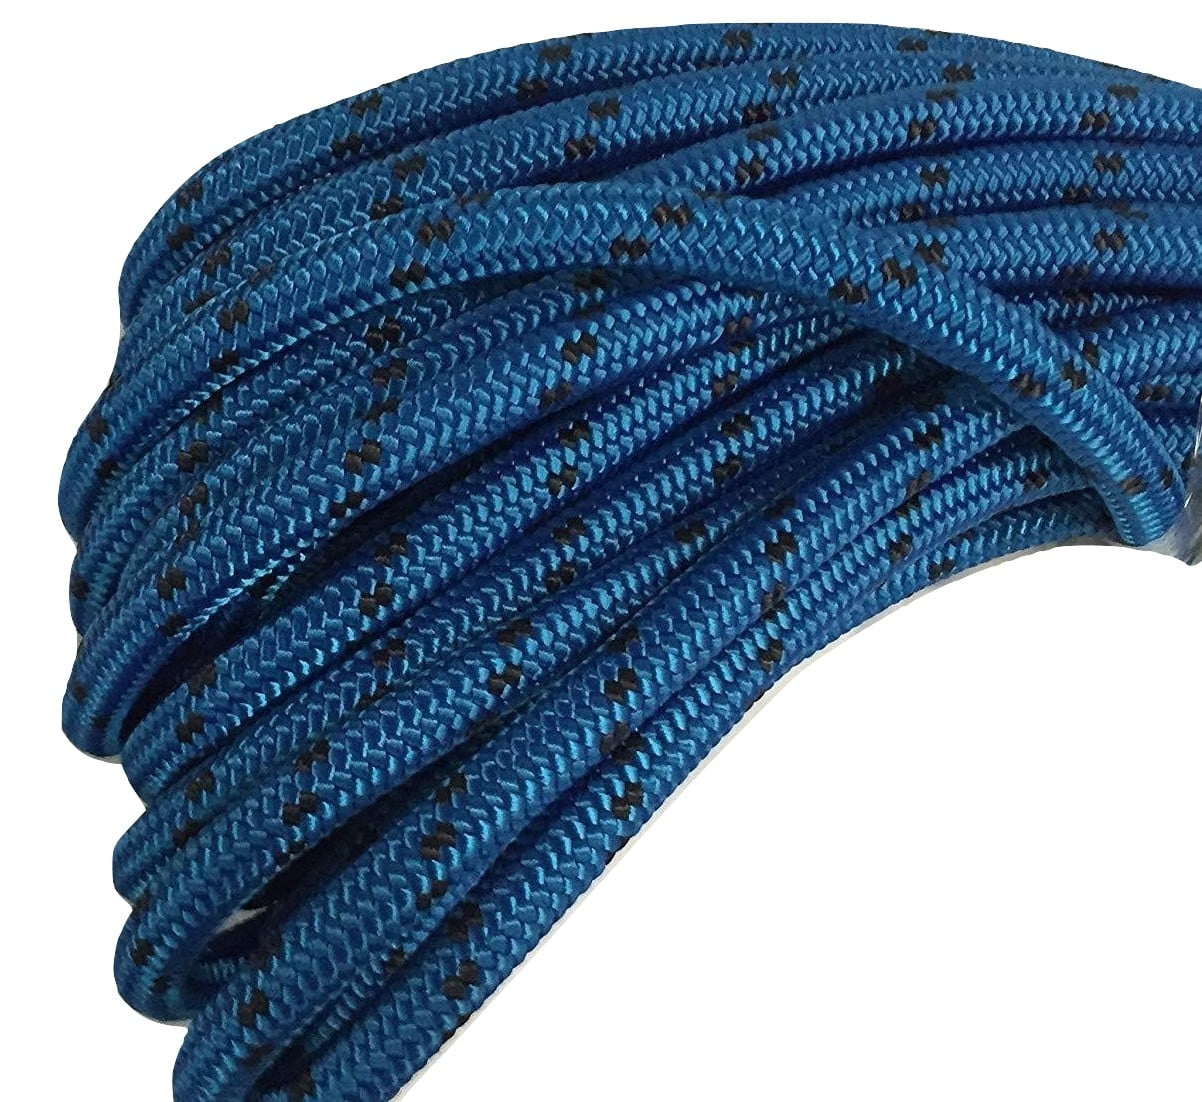 Double Braid-Yacht Braid Polyester Rope.Made in USA. 5/8" x 300 ft 